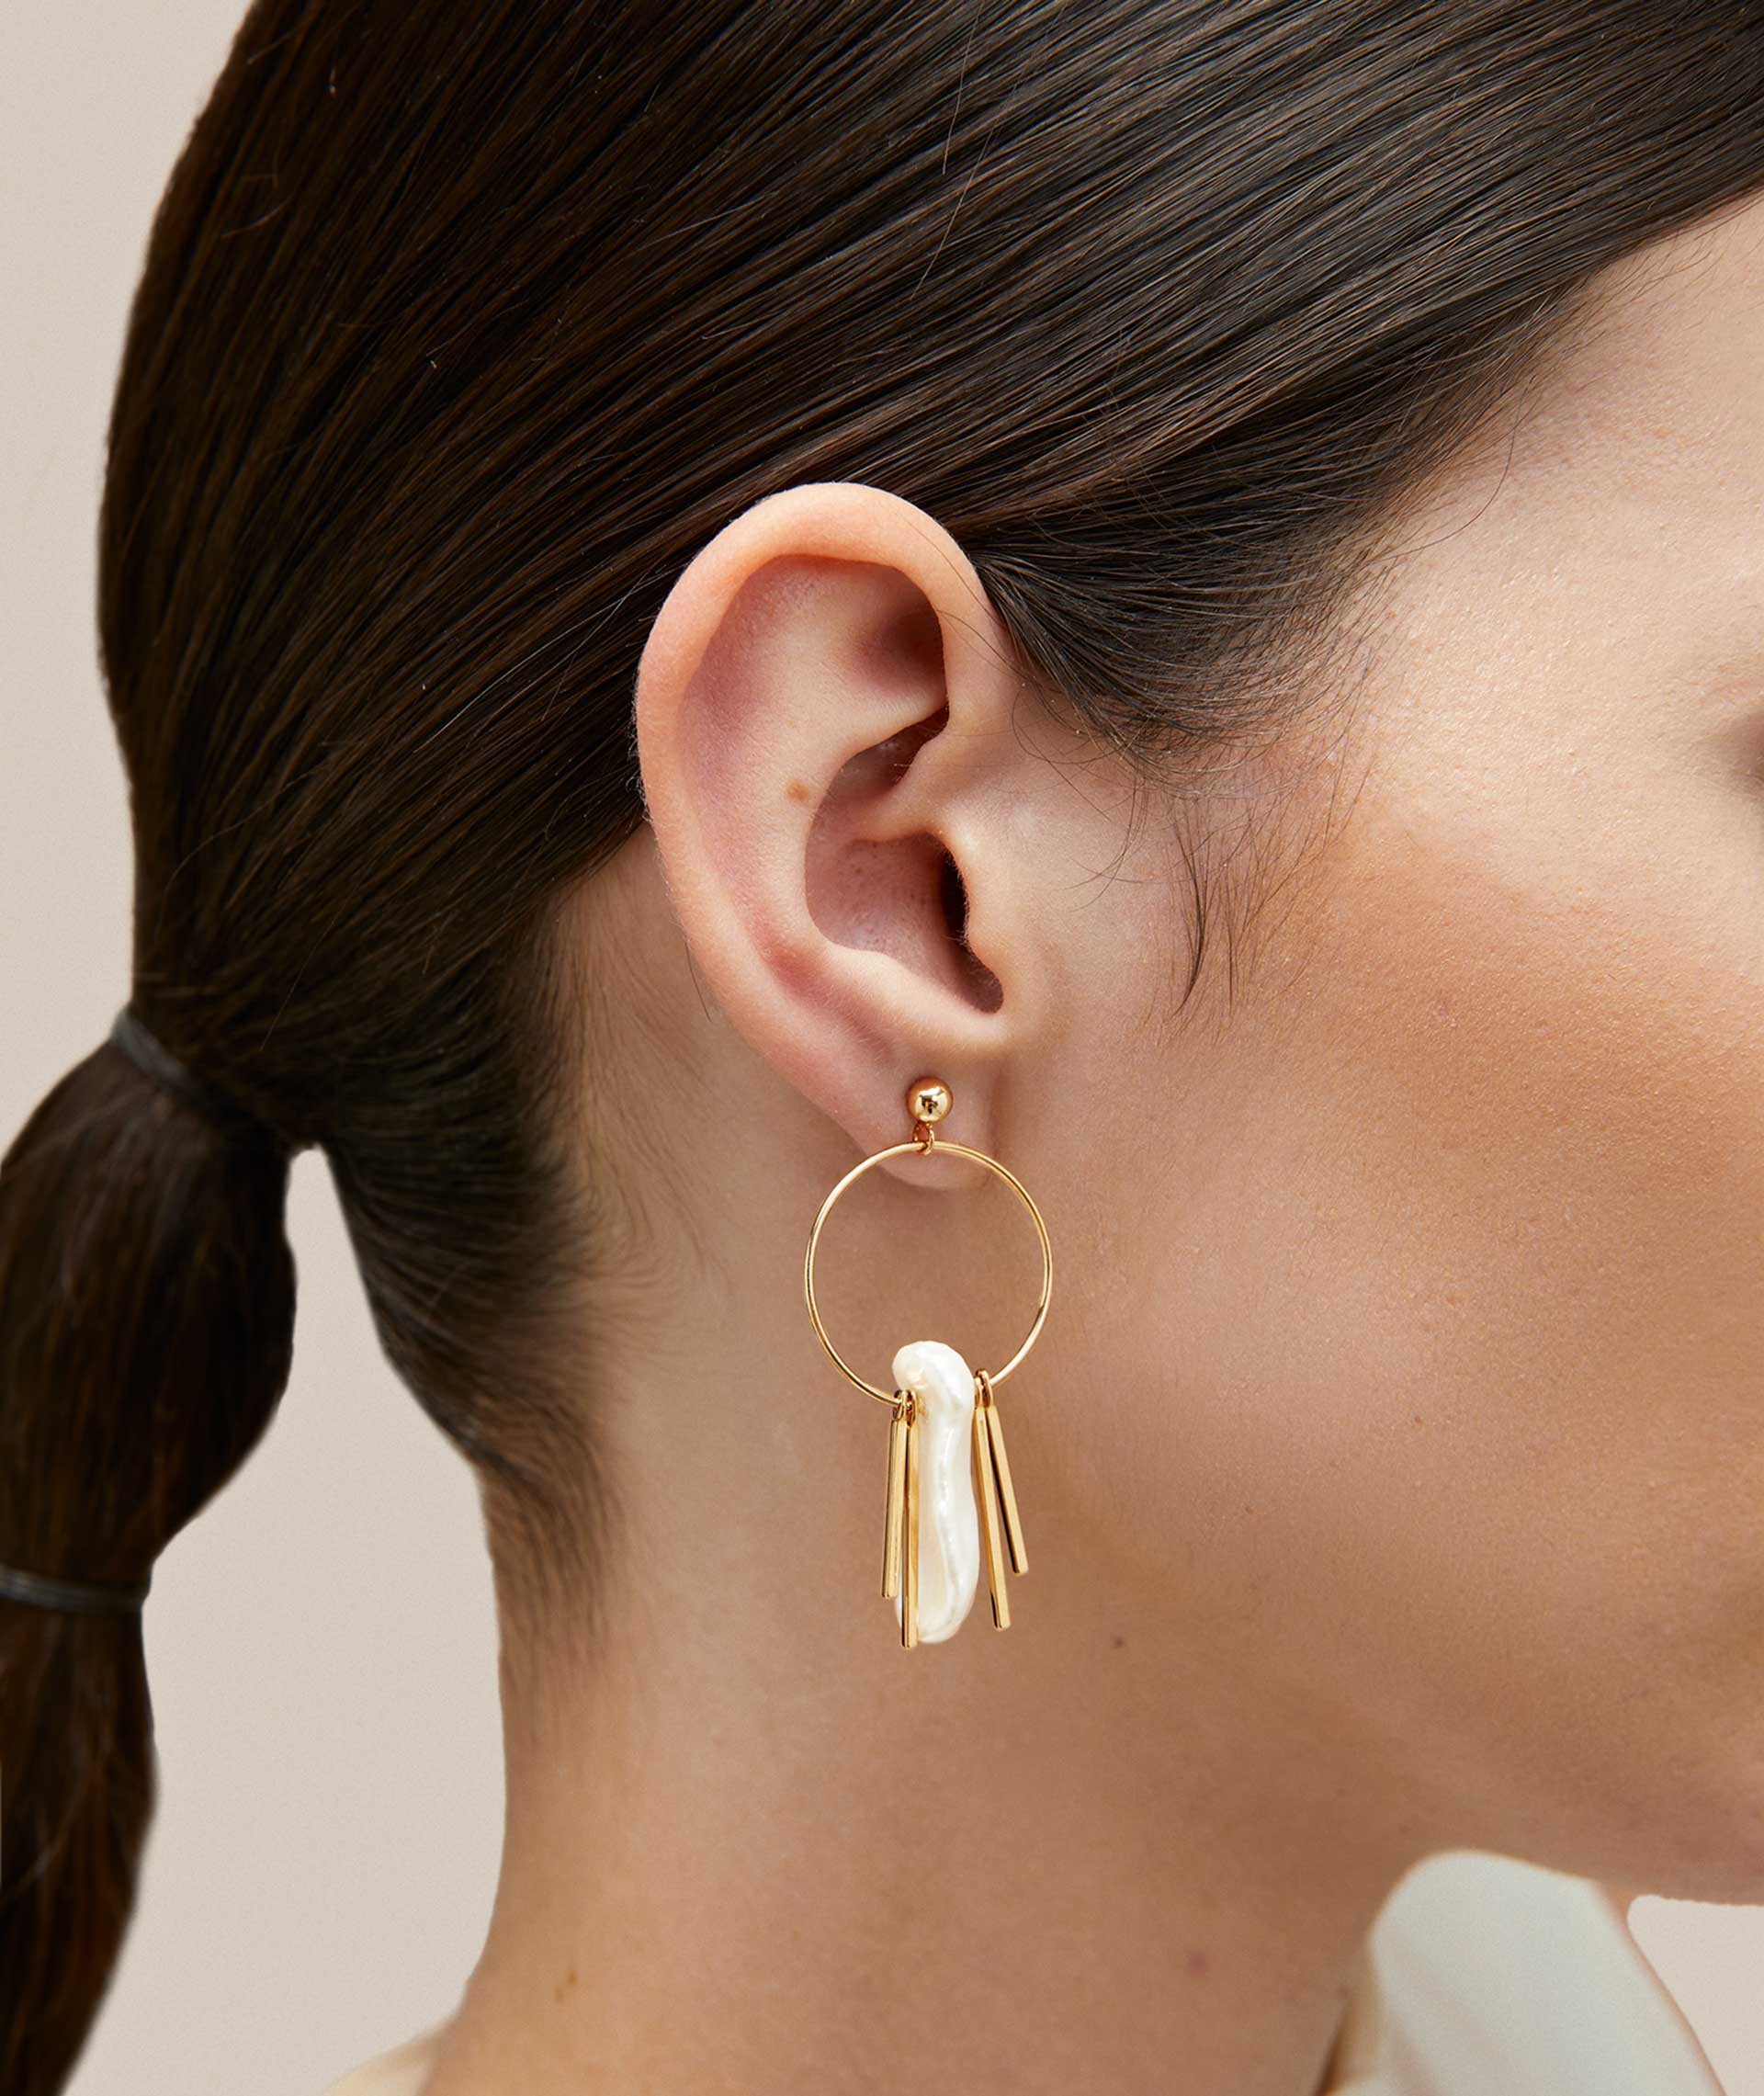 Earrings Macarena 18 Kt Gold Plated